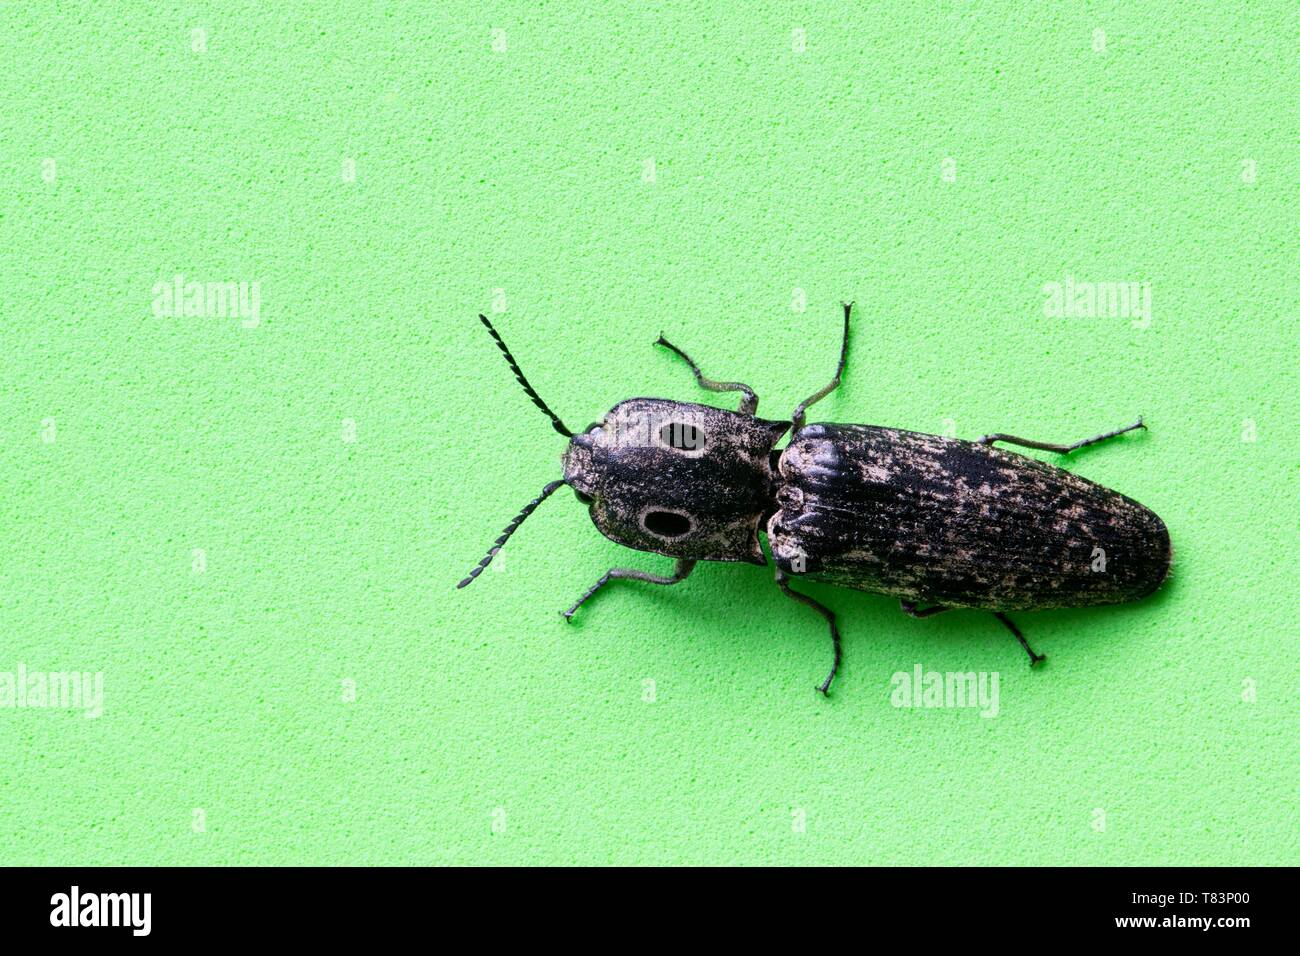 An Eastern-Eyed Click Beetle (Alaus oculatus) on a plain green background. Their false eyes help to confuse predators. They are not considered pests. Stock Photo